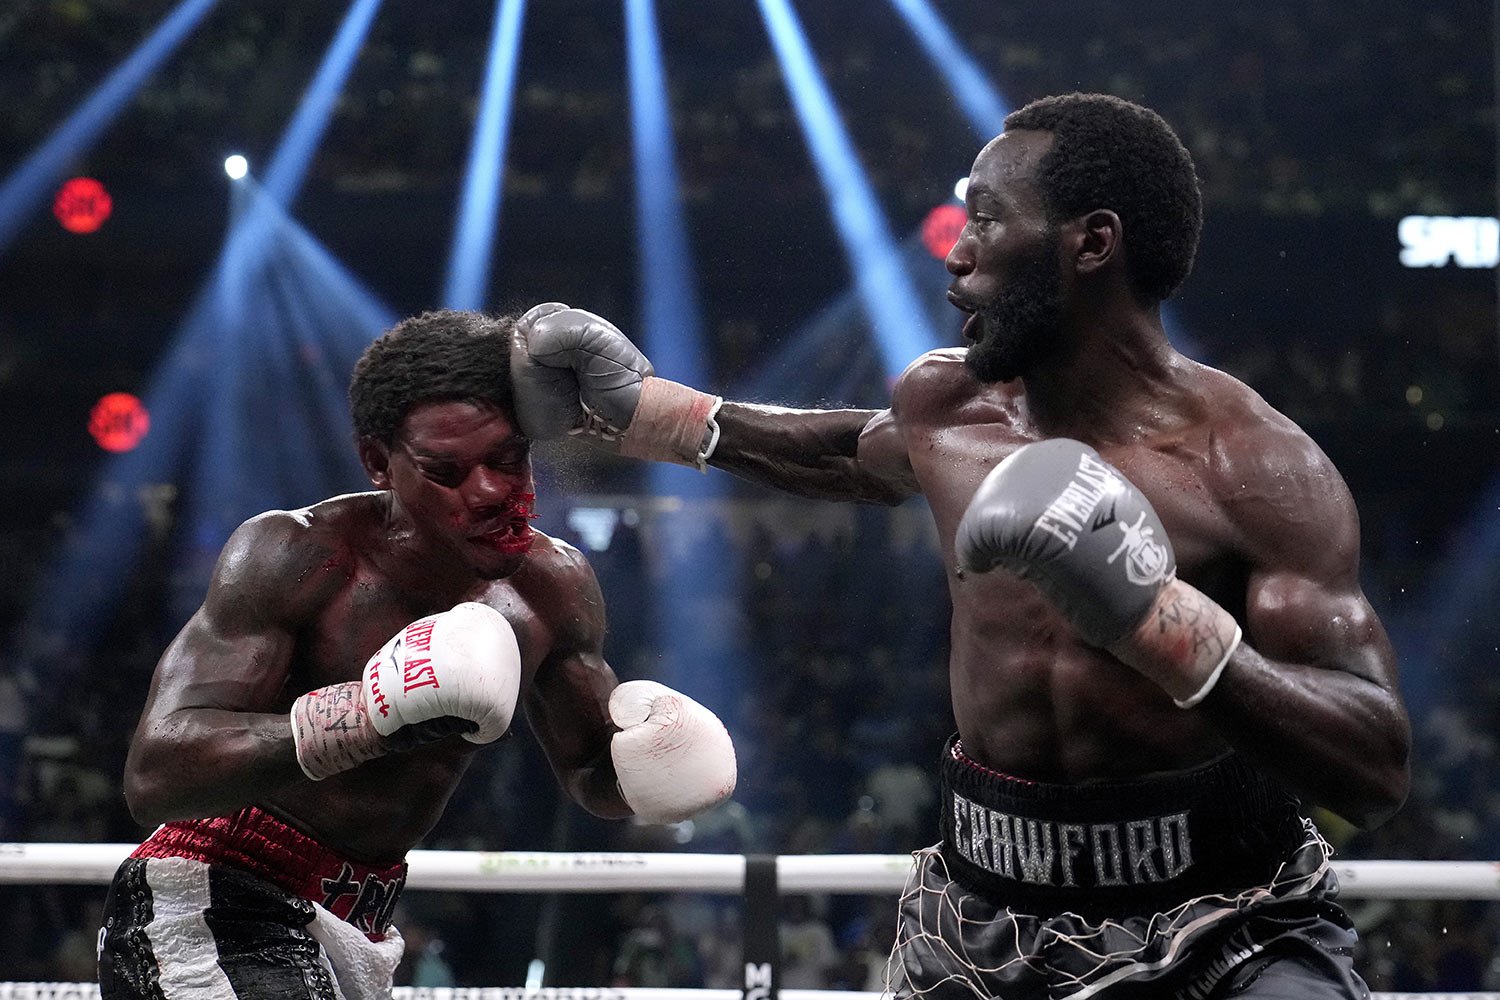  Terence Crawford, right, punches Errol Spence Jr. during their undisputed welterweight championship boxing match, in Las Vegas, July 29, 2023. (AP Photo/John Locher) 